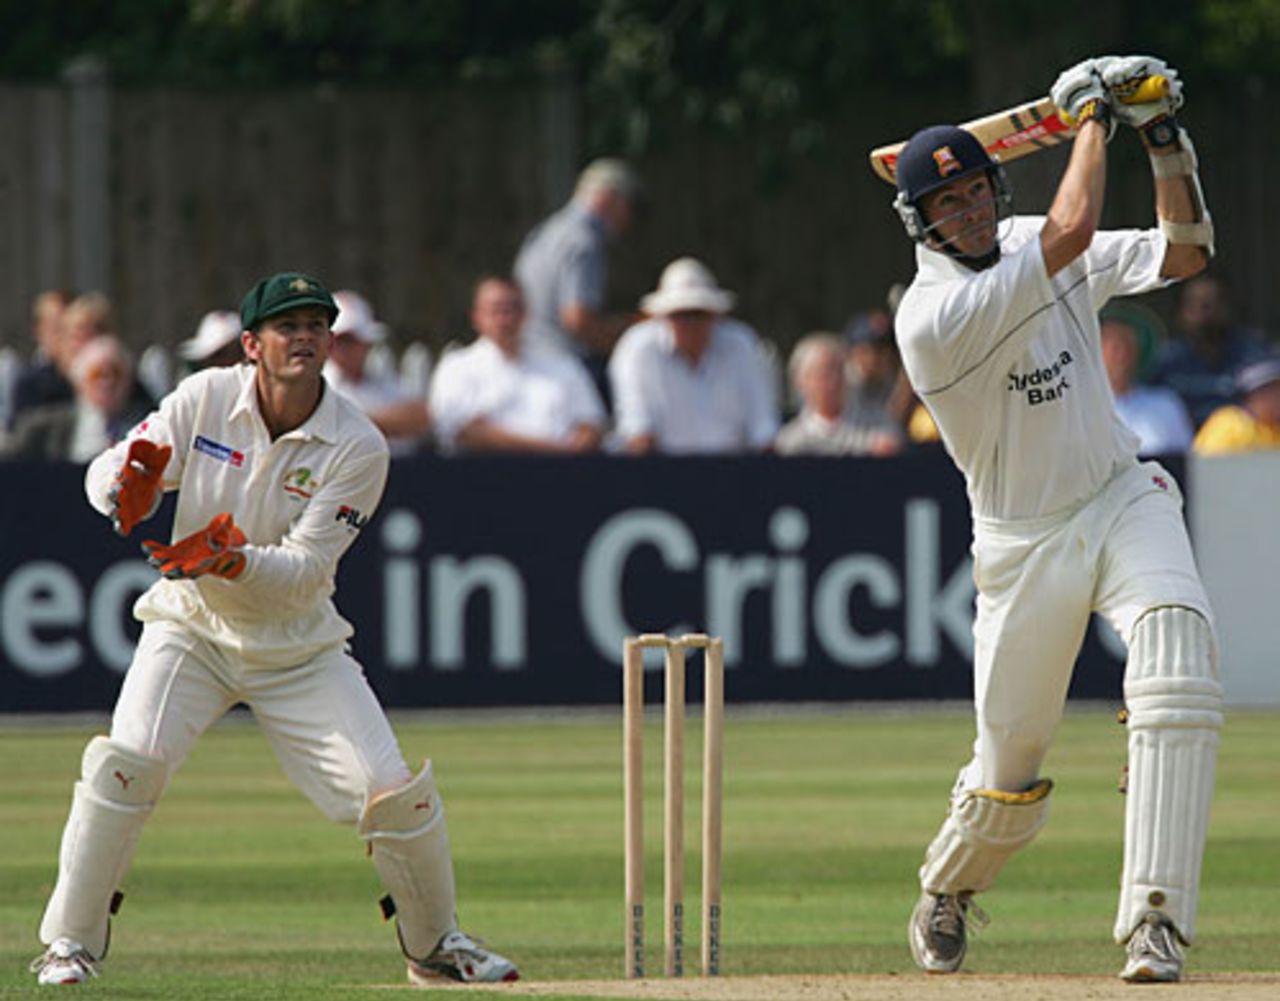 Will Jefferson clobbers one over the top as Essex dominate Australia's bowlers, Essex v Australia, Chelmsford, September 3, 2005